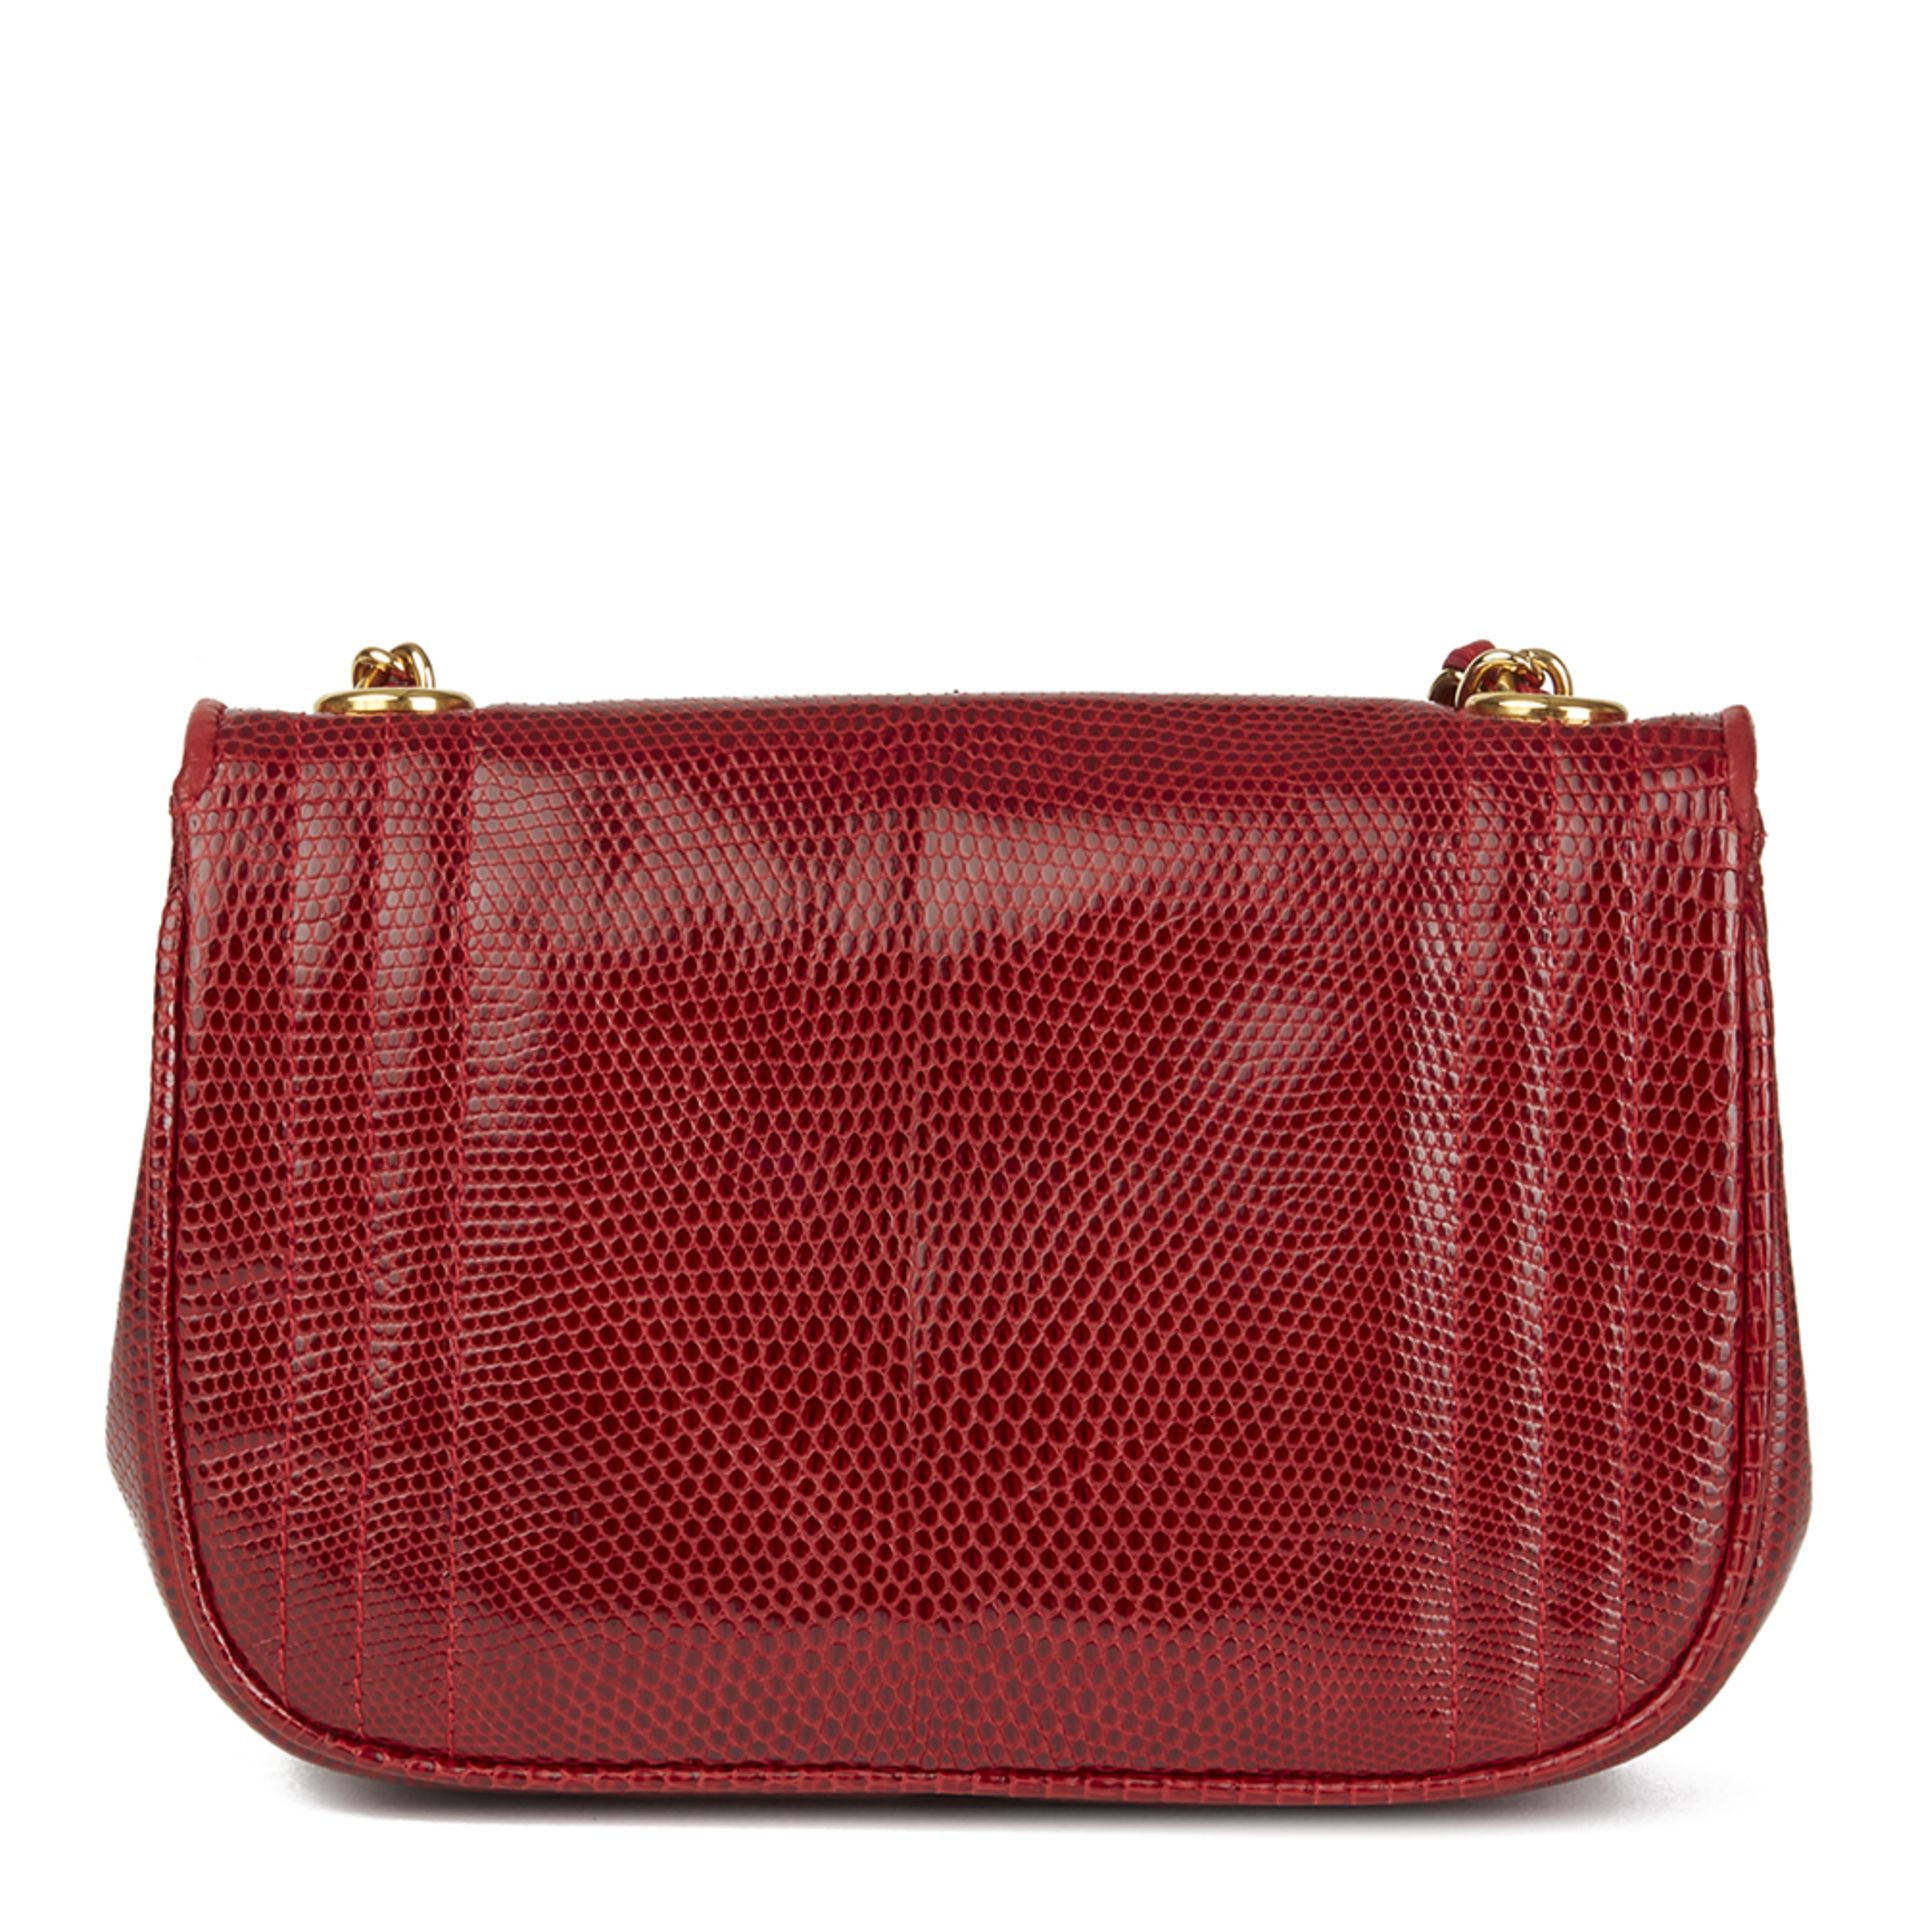 Chanel Red Lizard Leather Vintage Timeless Mini Flap Bag - Image 10 of 12